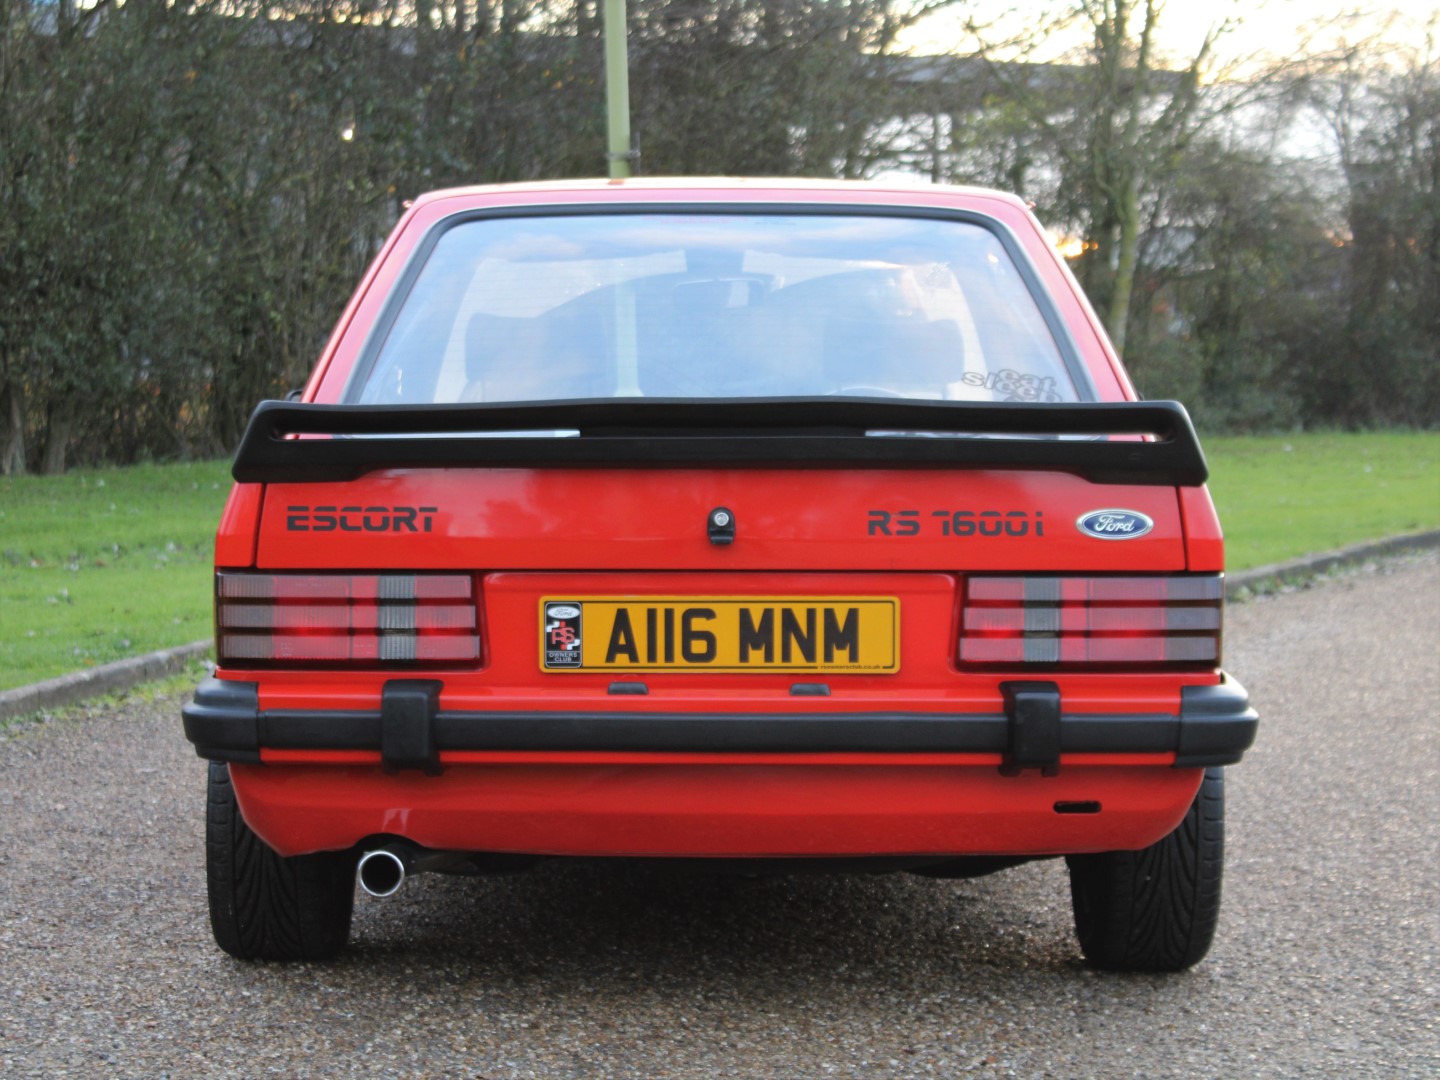 1983 Ford Escort RS 1600i - Image 5 of 24